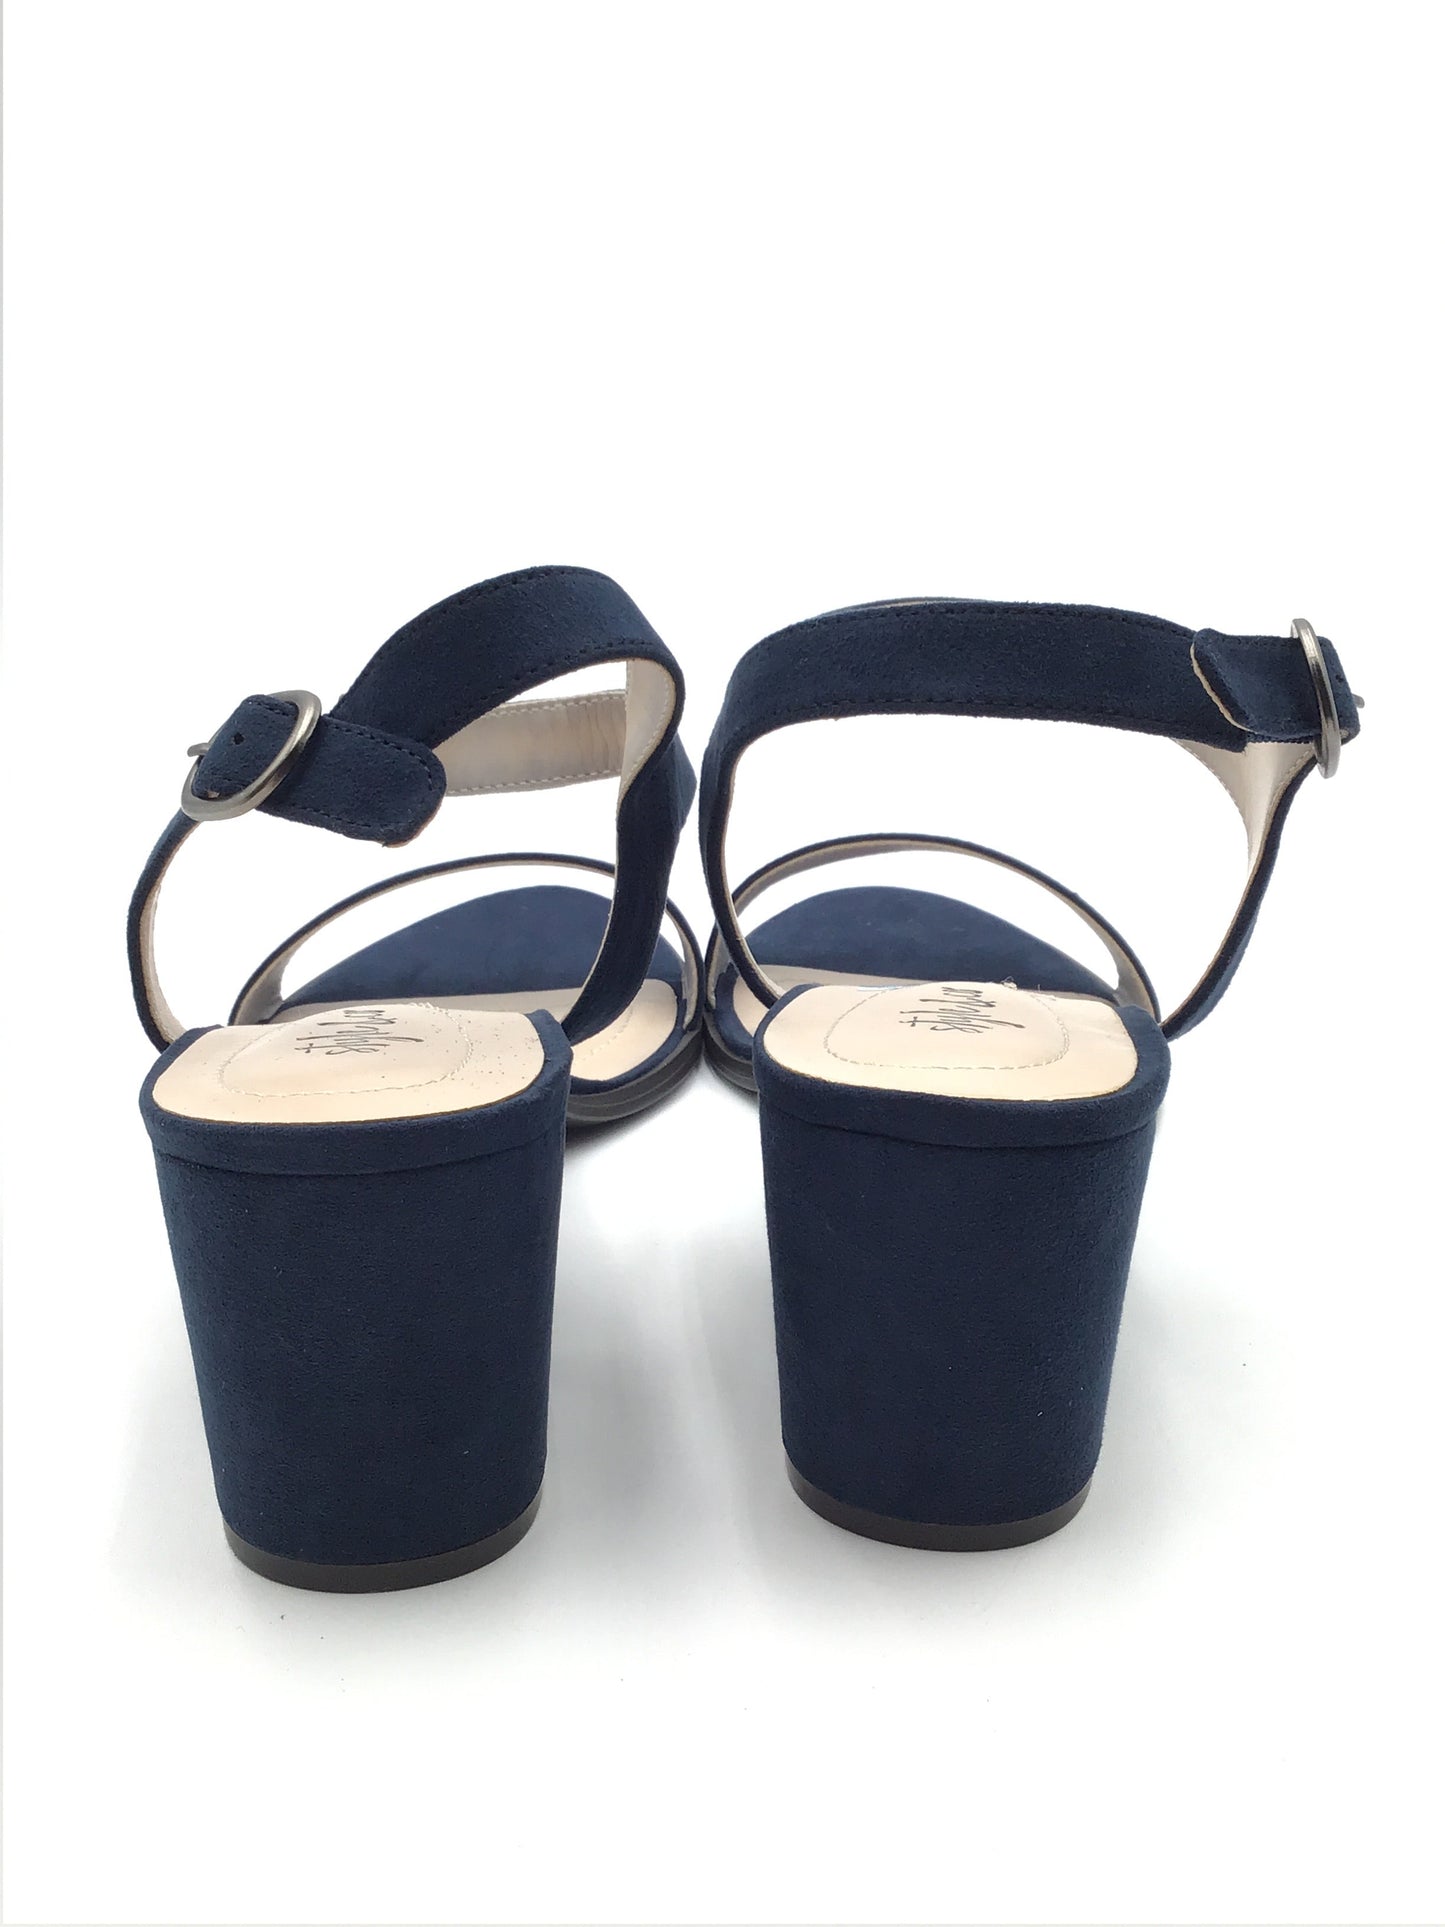 Blue Sandals Heels Block Style And Company, Size 9